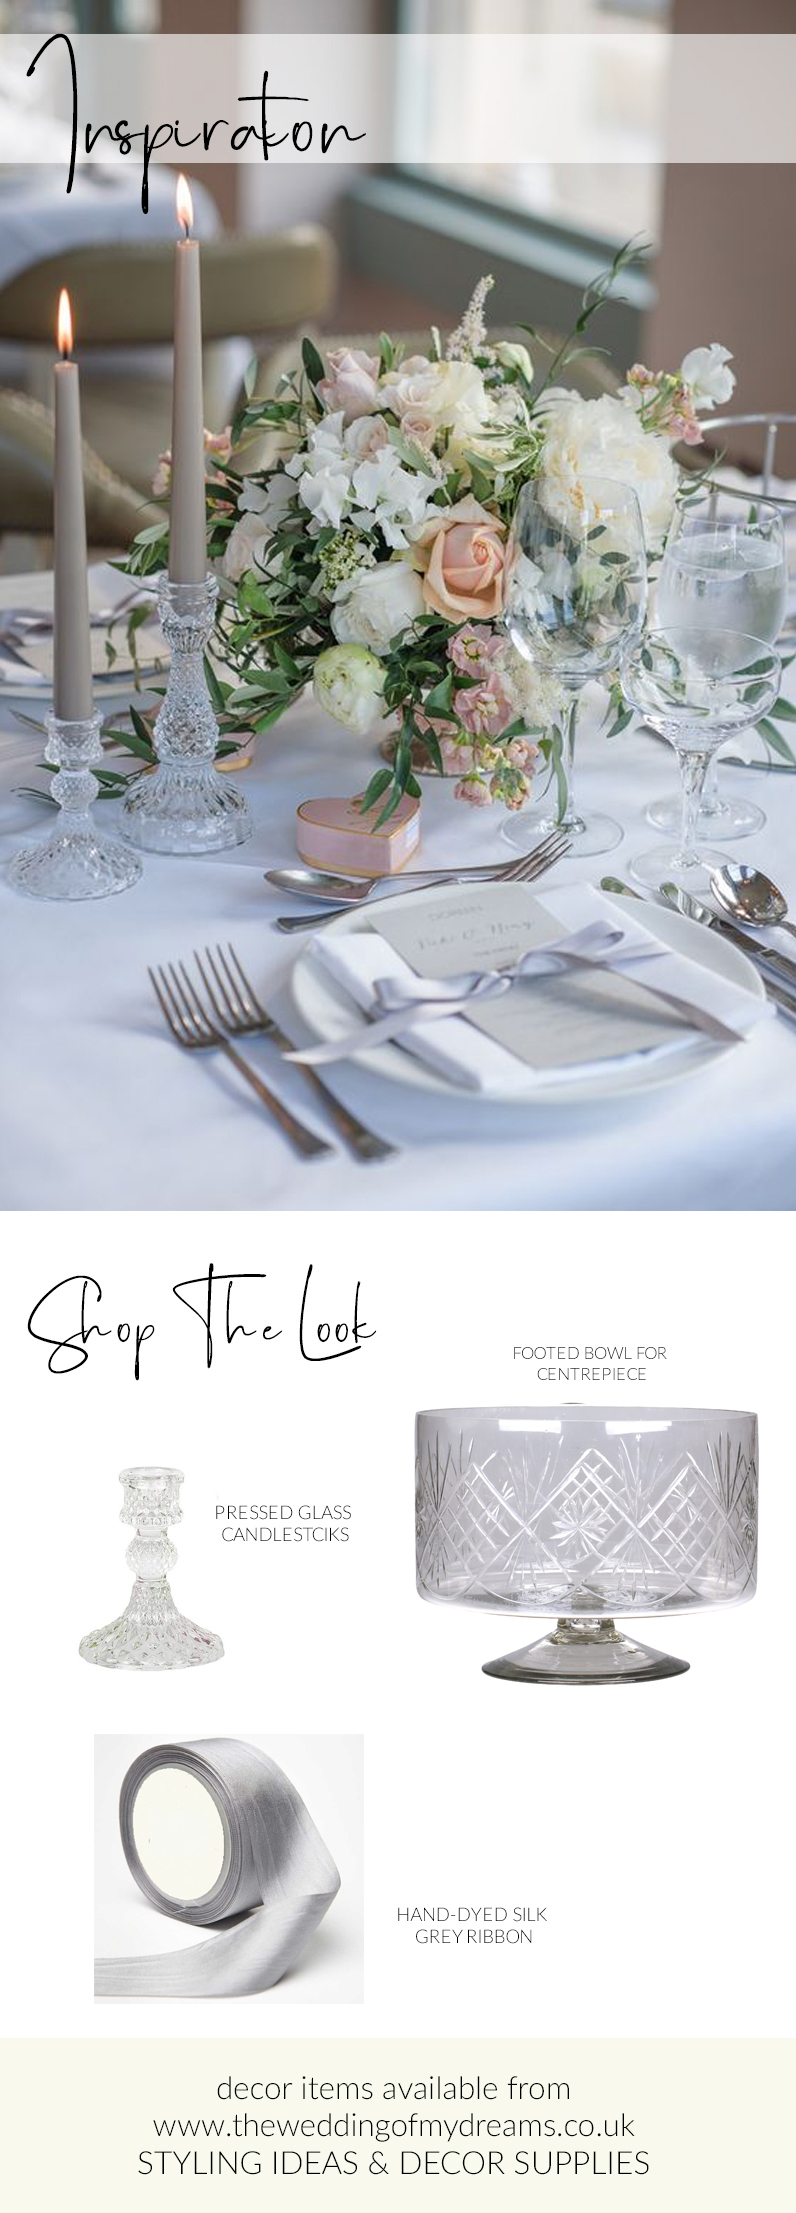 Elegant-Babbington-House-wedding-centrepieces-shop-the-look-glass-candlesticks-glass-footed-bowls-silver-grey-ribbon-place-settings